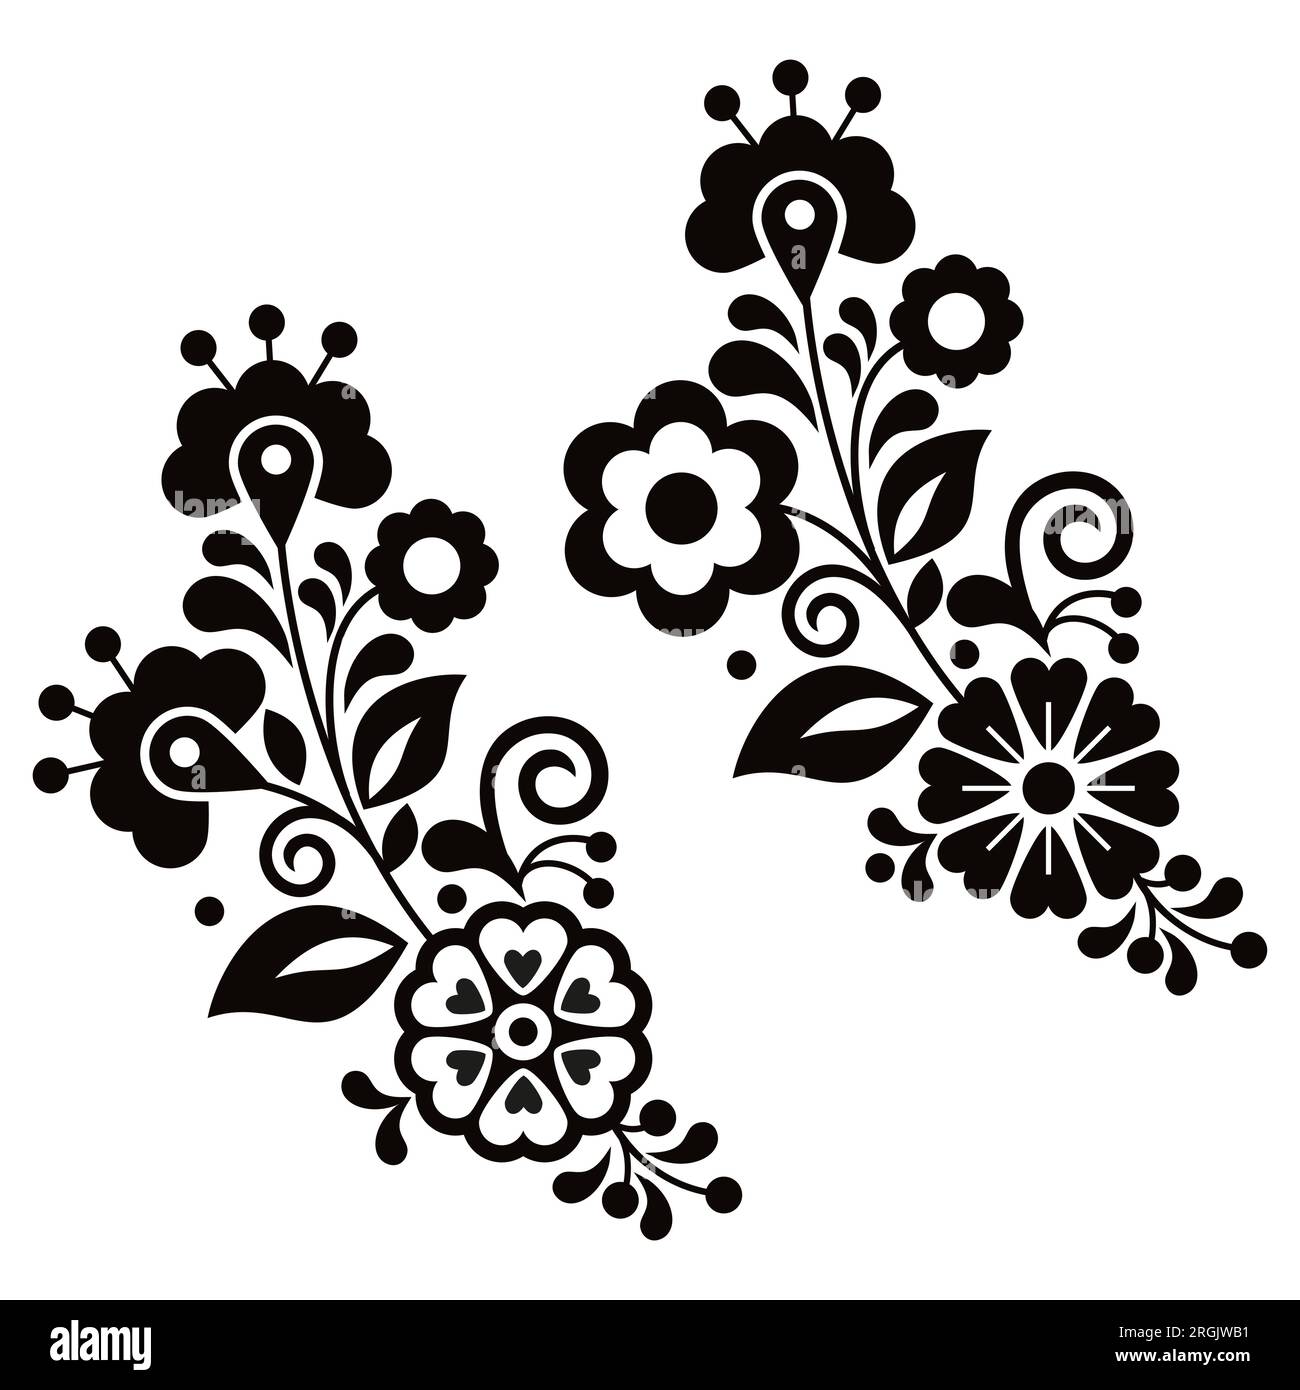 Mexican folk art style vector floral long black and white pattern, designs inspired by traditional embroidery from Mexico Stock Vector